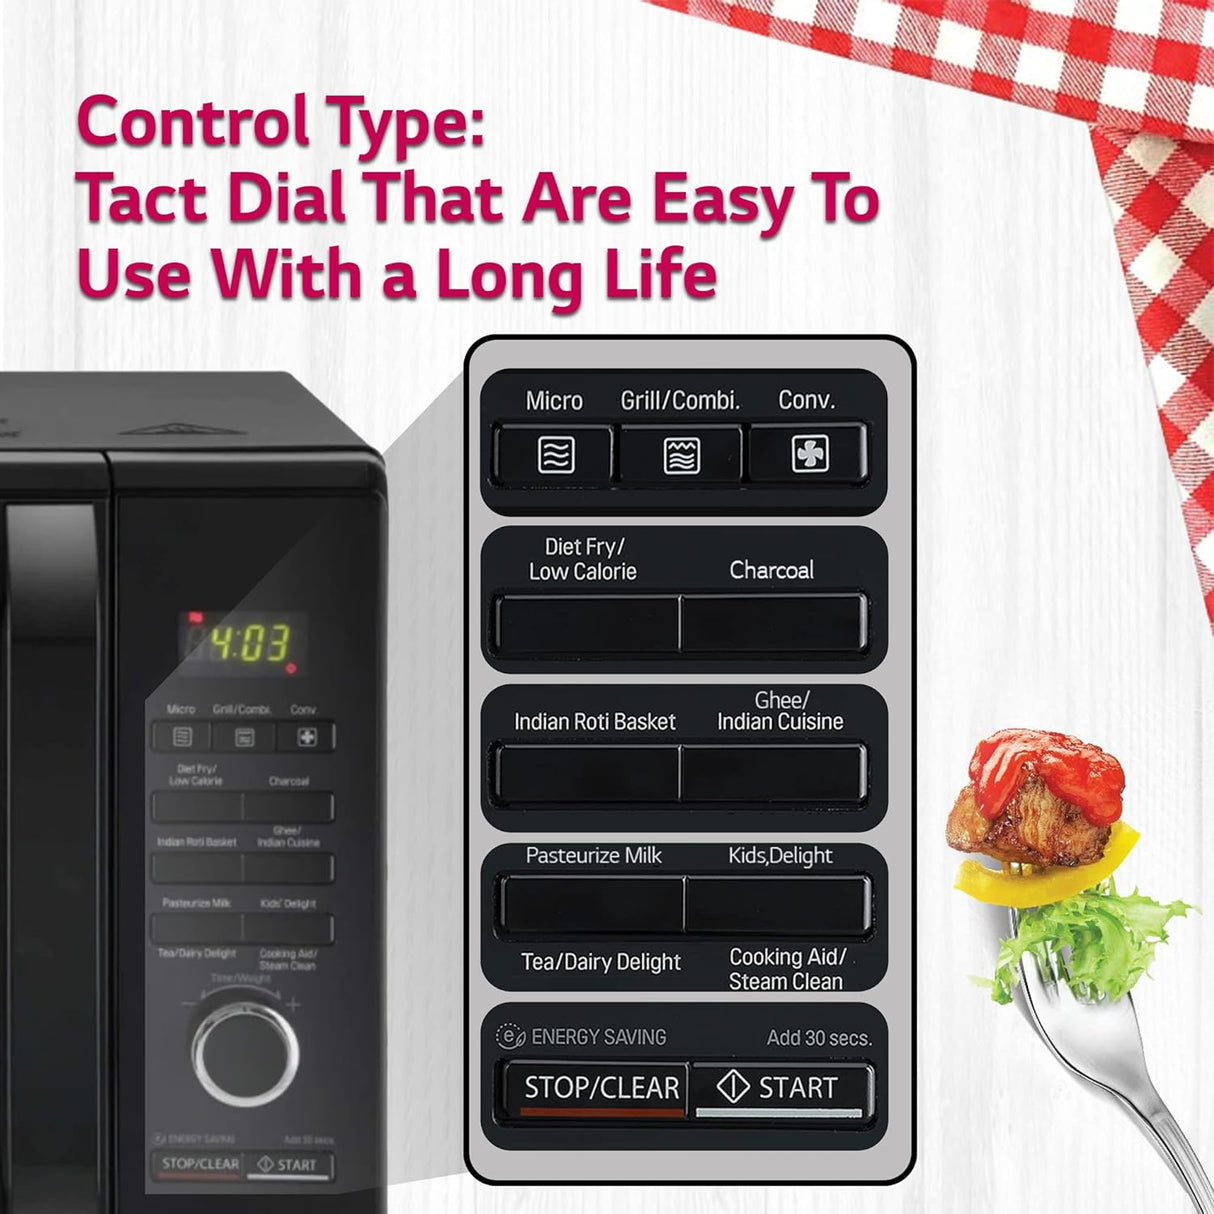 Best Microwave: LG 28L Charcoal Convection Microwave - Diet Fry Technology